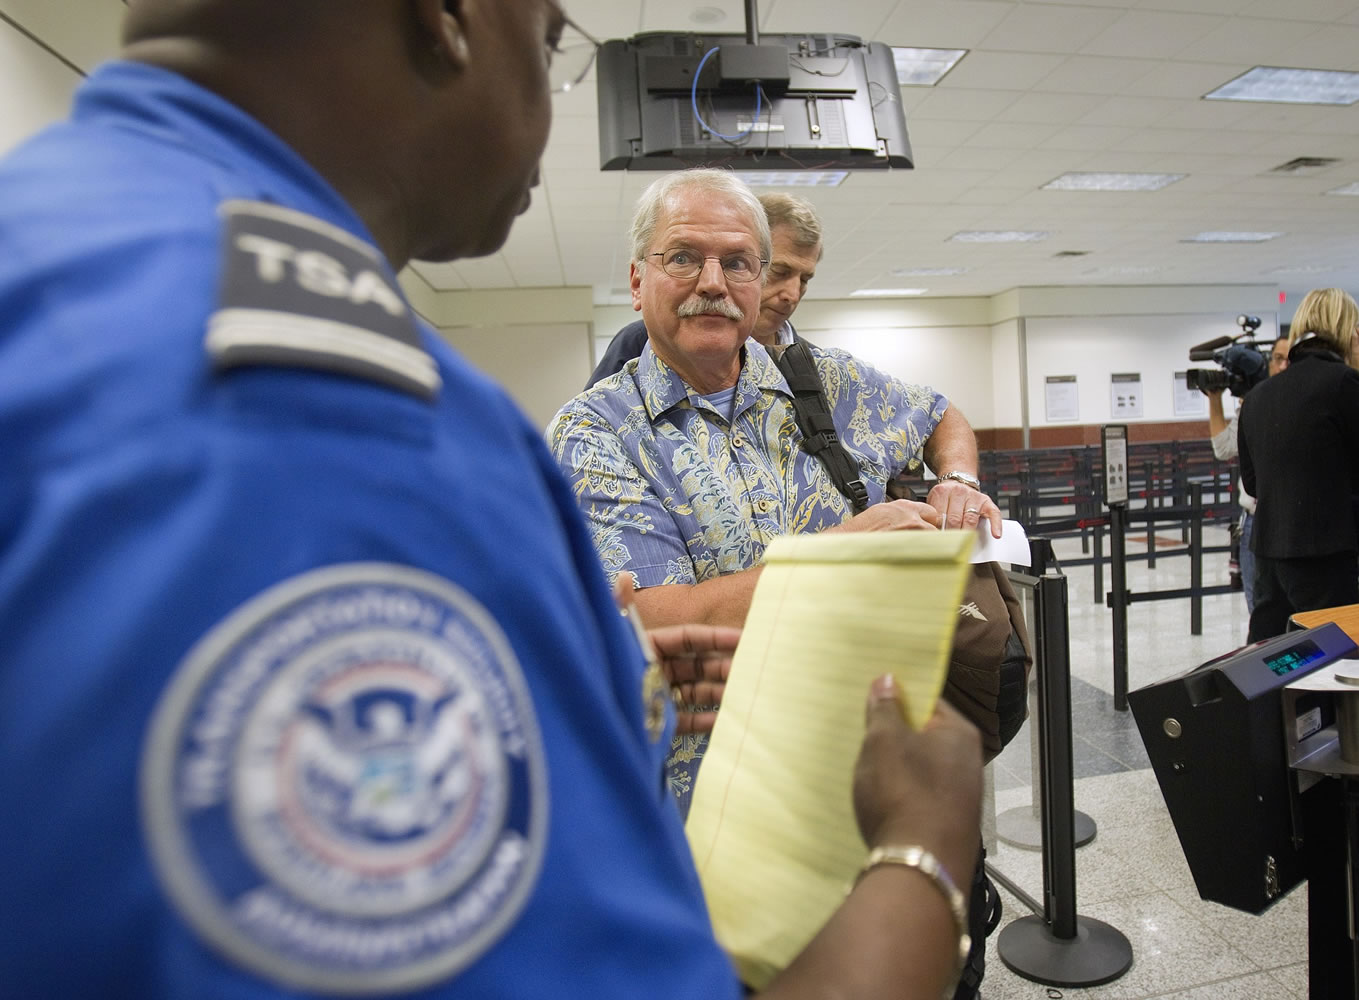 Passenger Don Heim, right, of Alpharetta, Ga., is briefed by Transportation Security Administration trainer Byron Gibson before going through a new expedited security line at Hartsfield-Jackson International Airport in Atlanta.